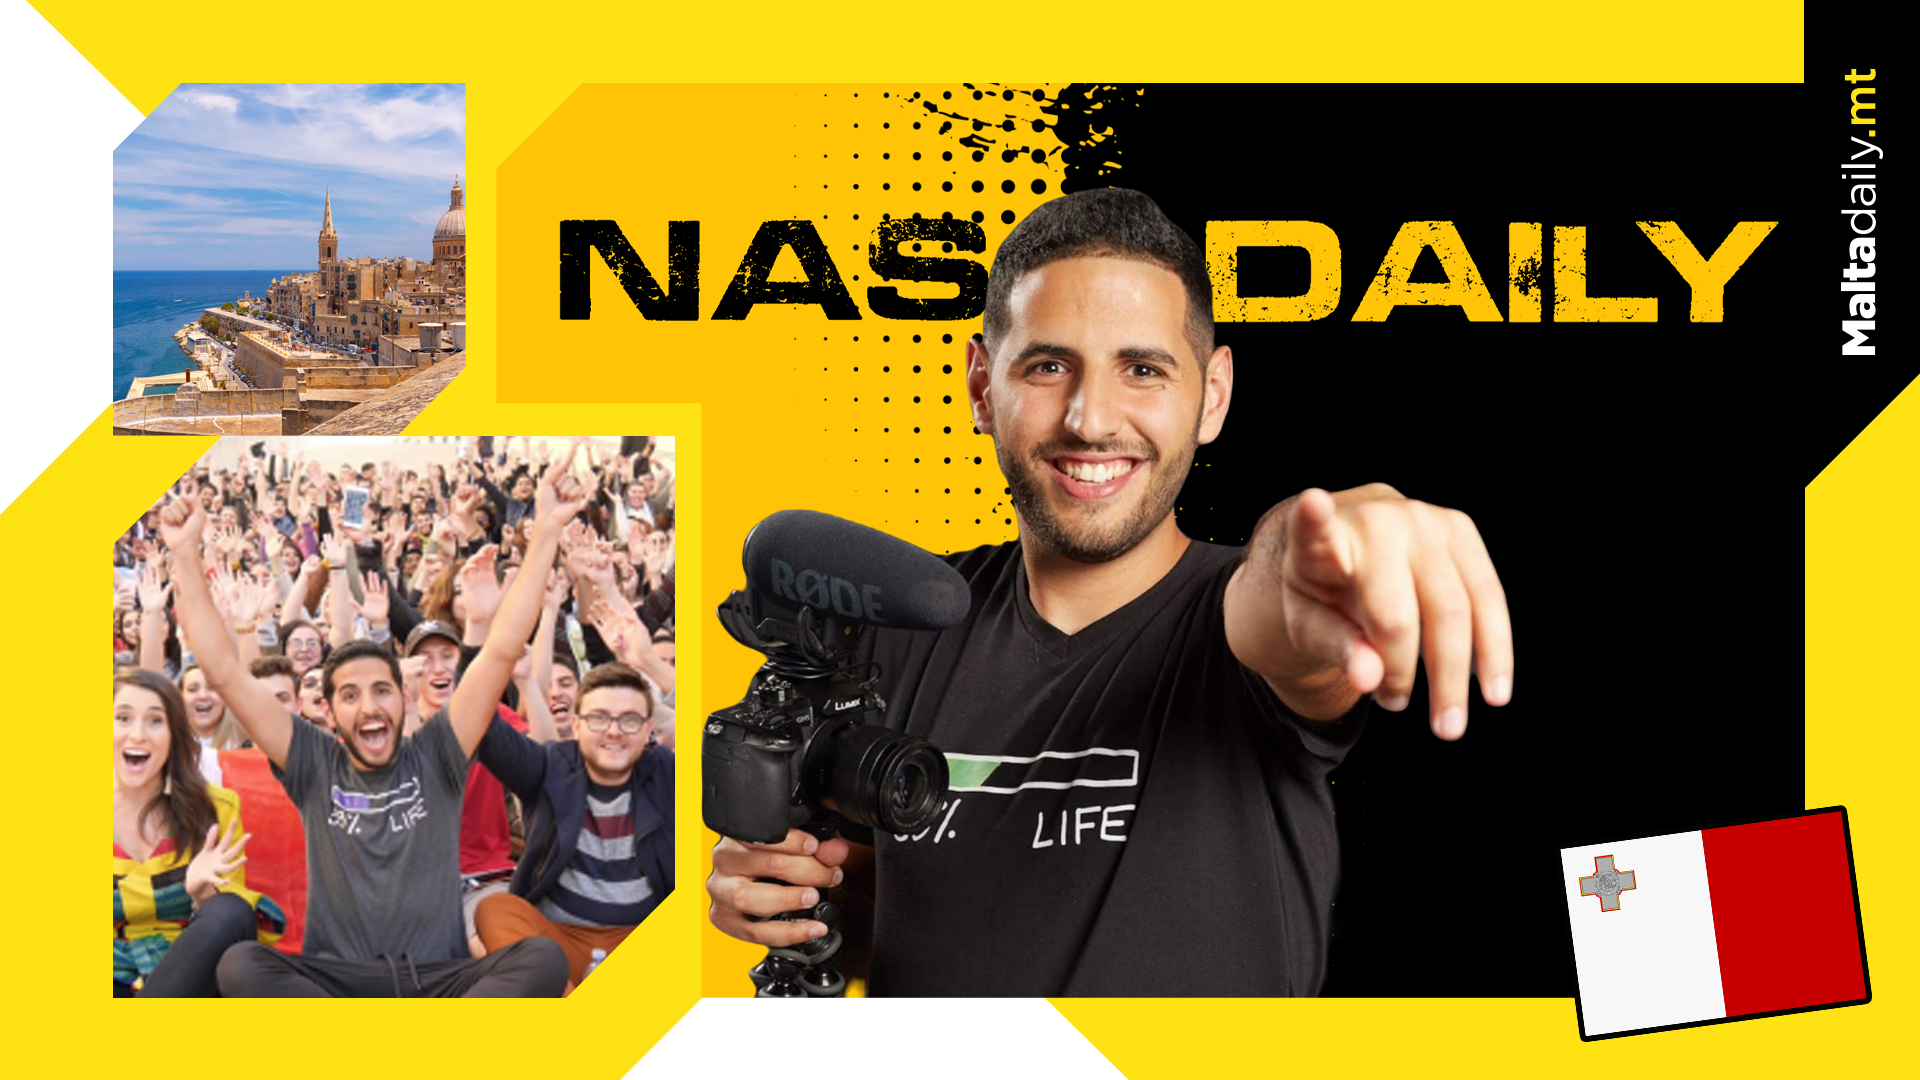 Influencer Nas Daily returning to Malta this year